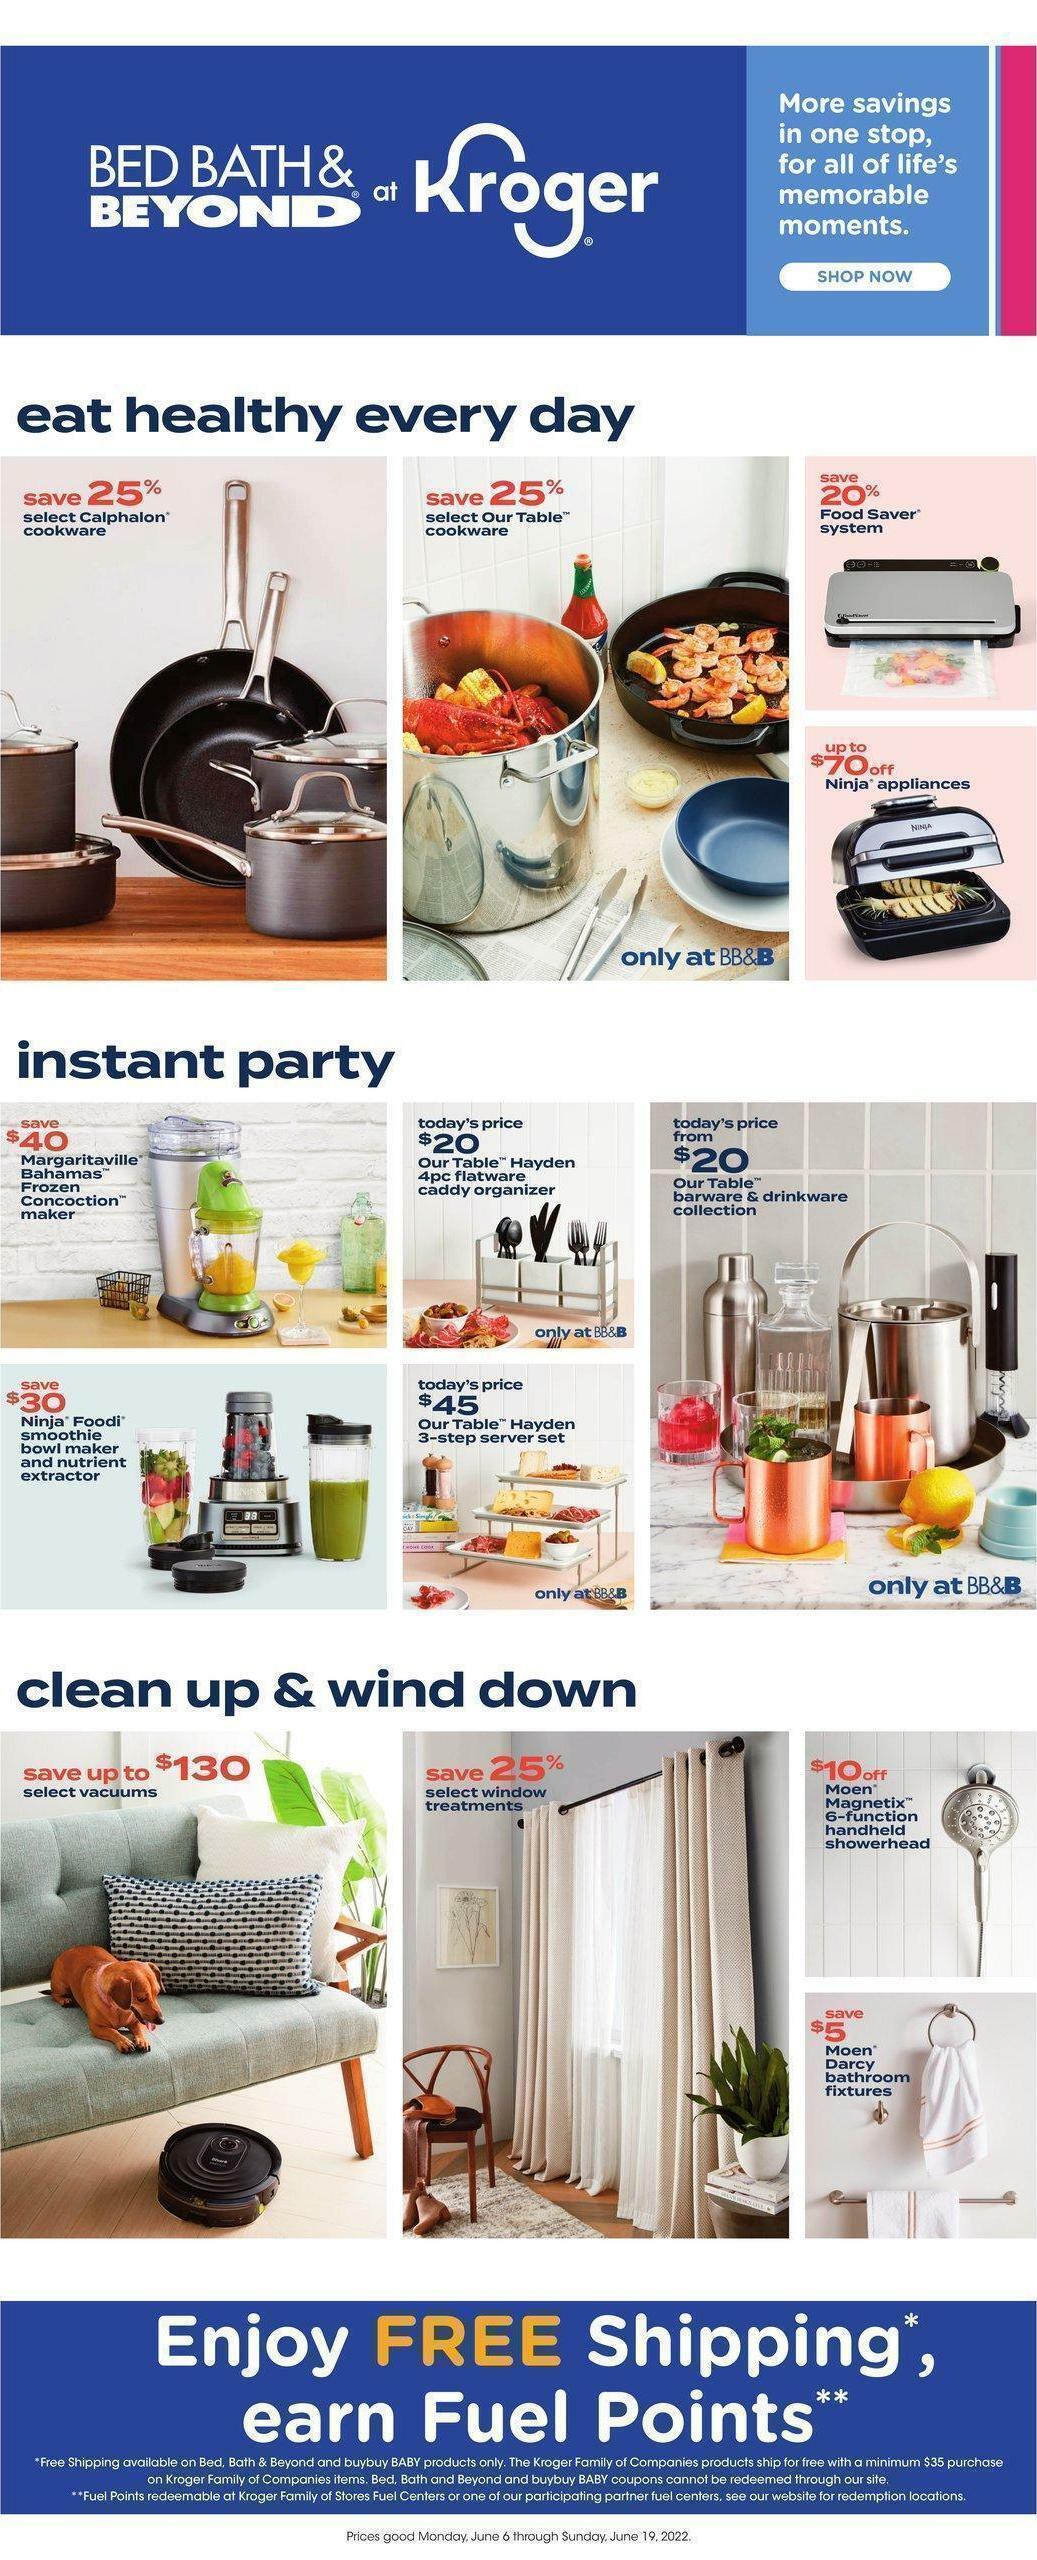 Kroger Bed, Bath & Beyond Weekly Ad from June 6